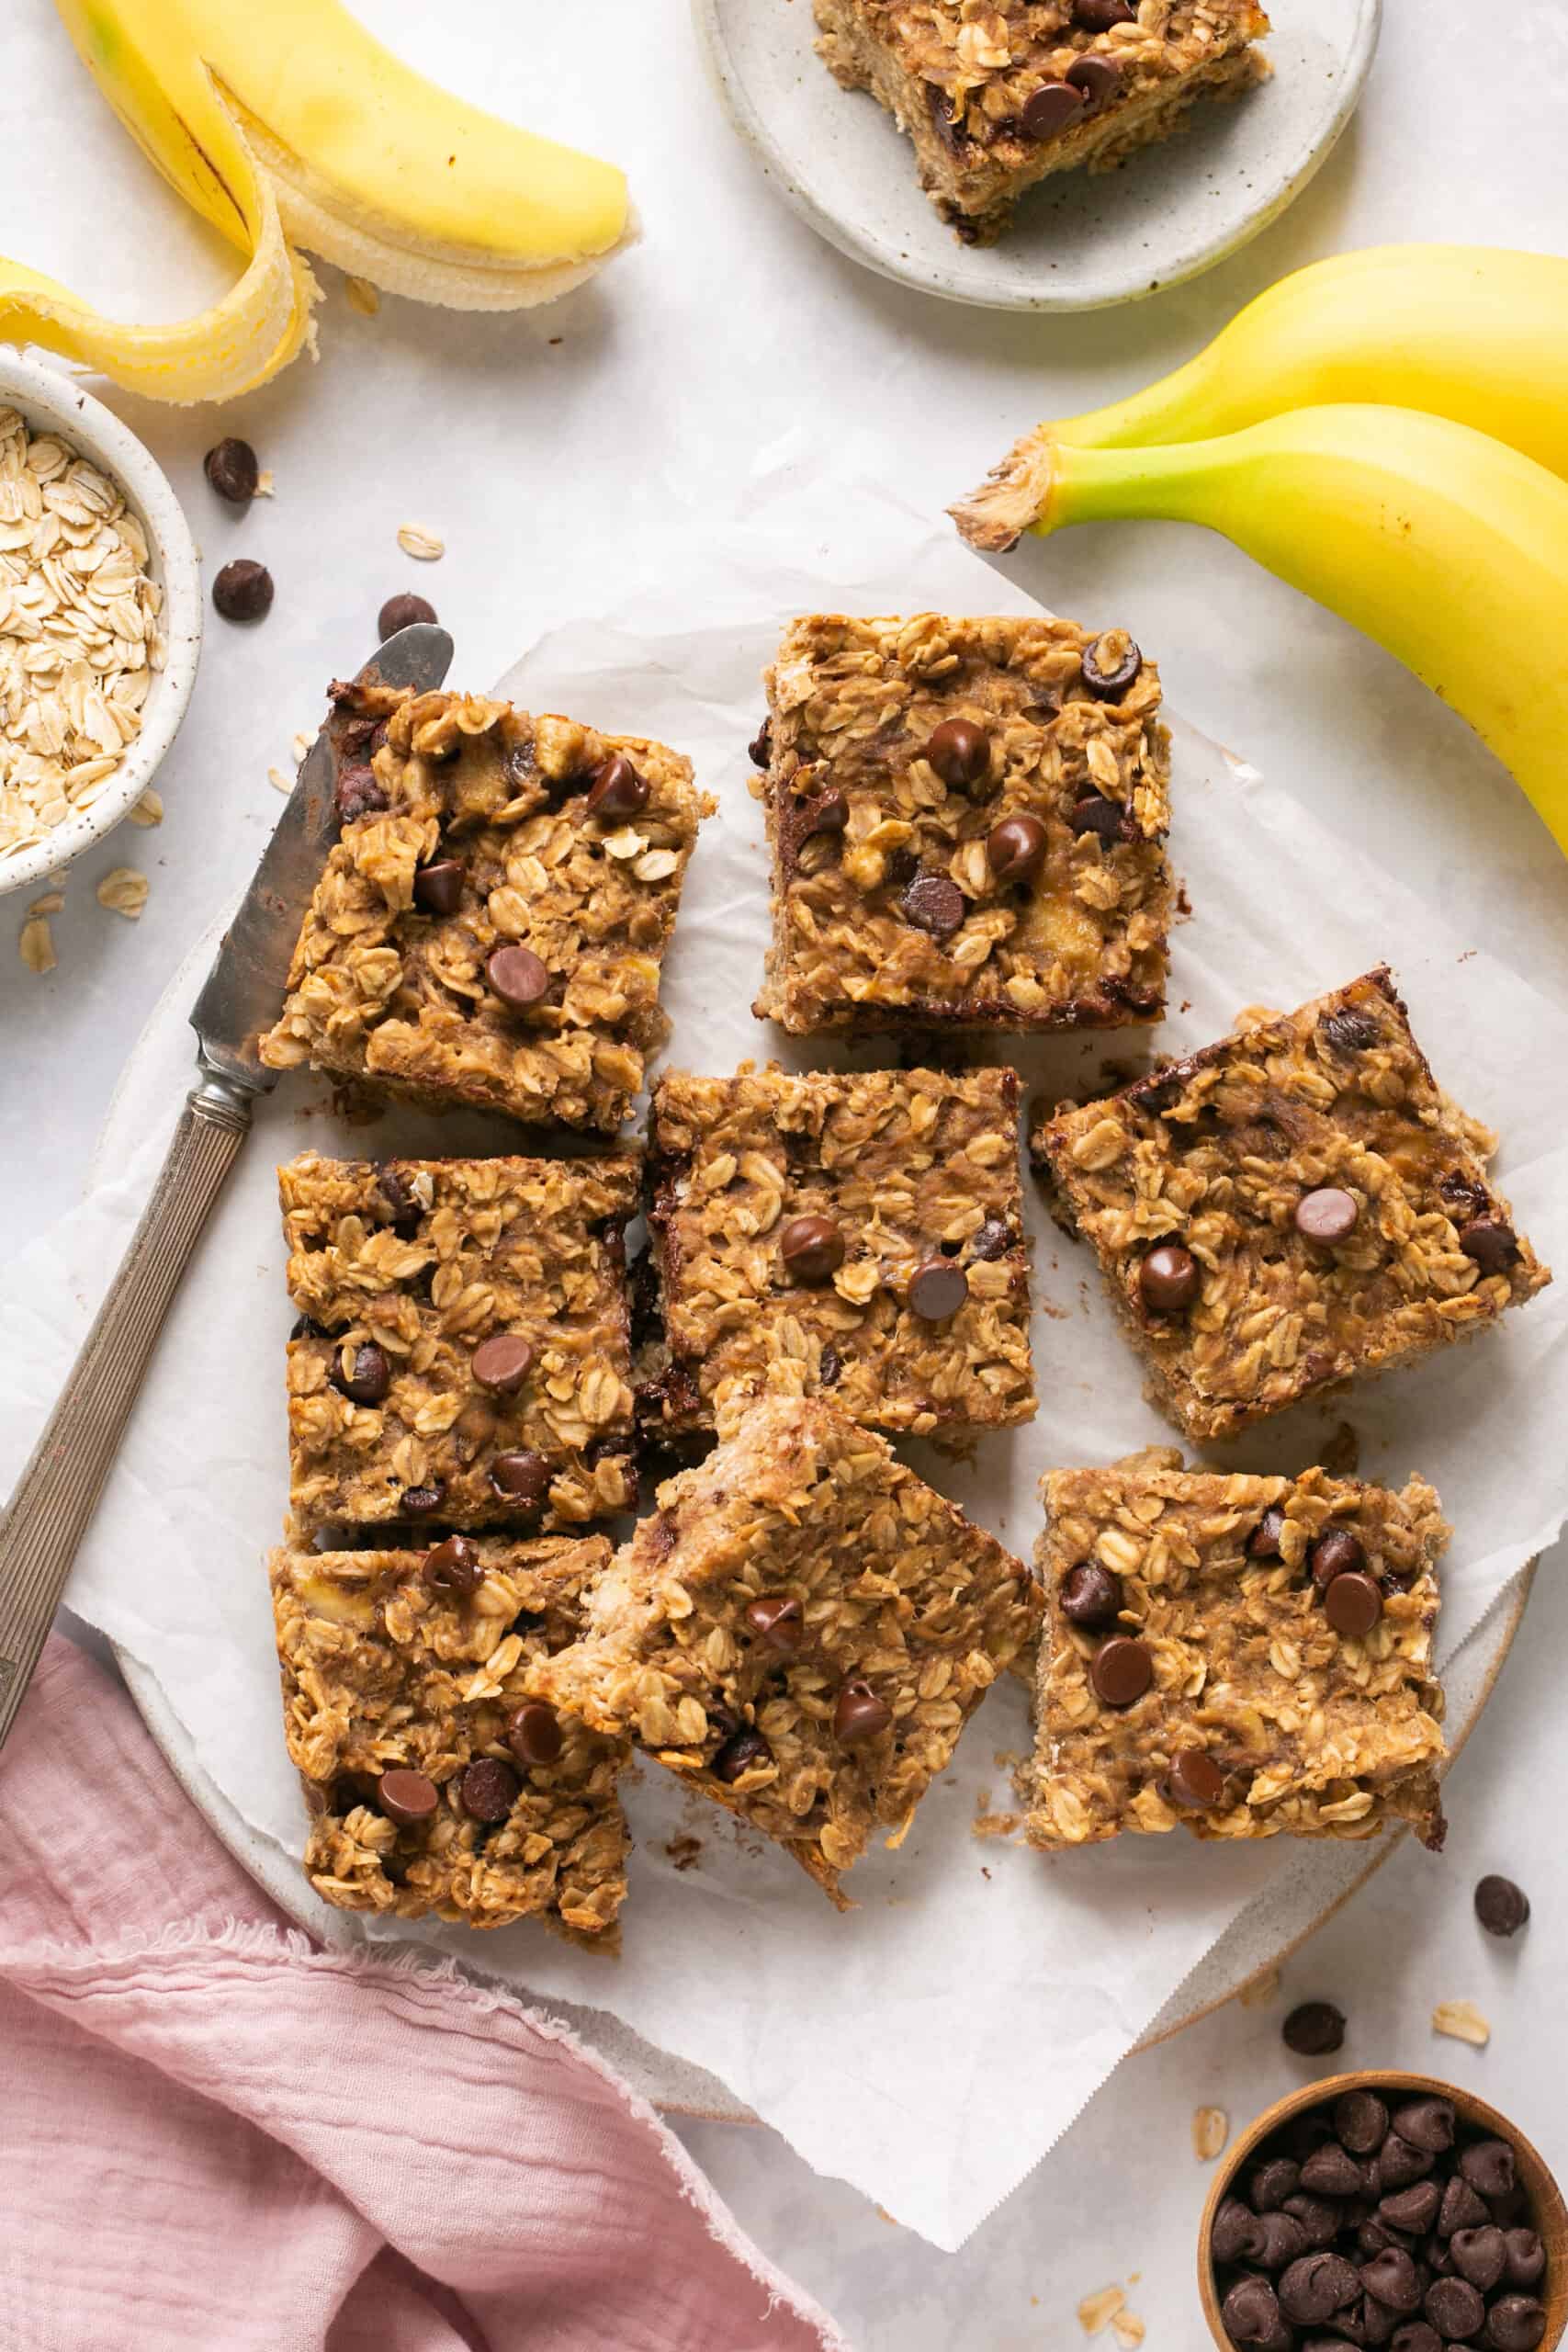 Peanut butter banana oatmeal bars cut into squares on parchment paper.